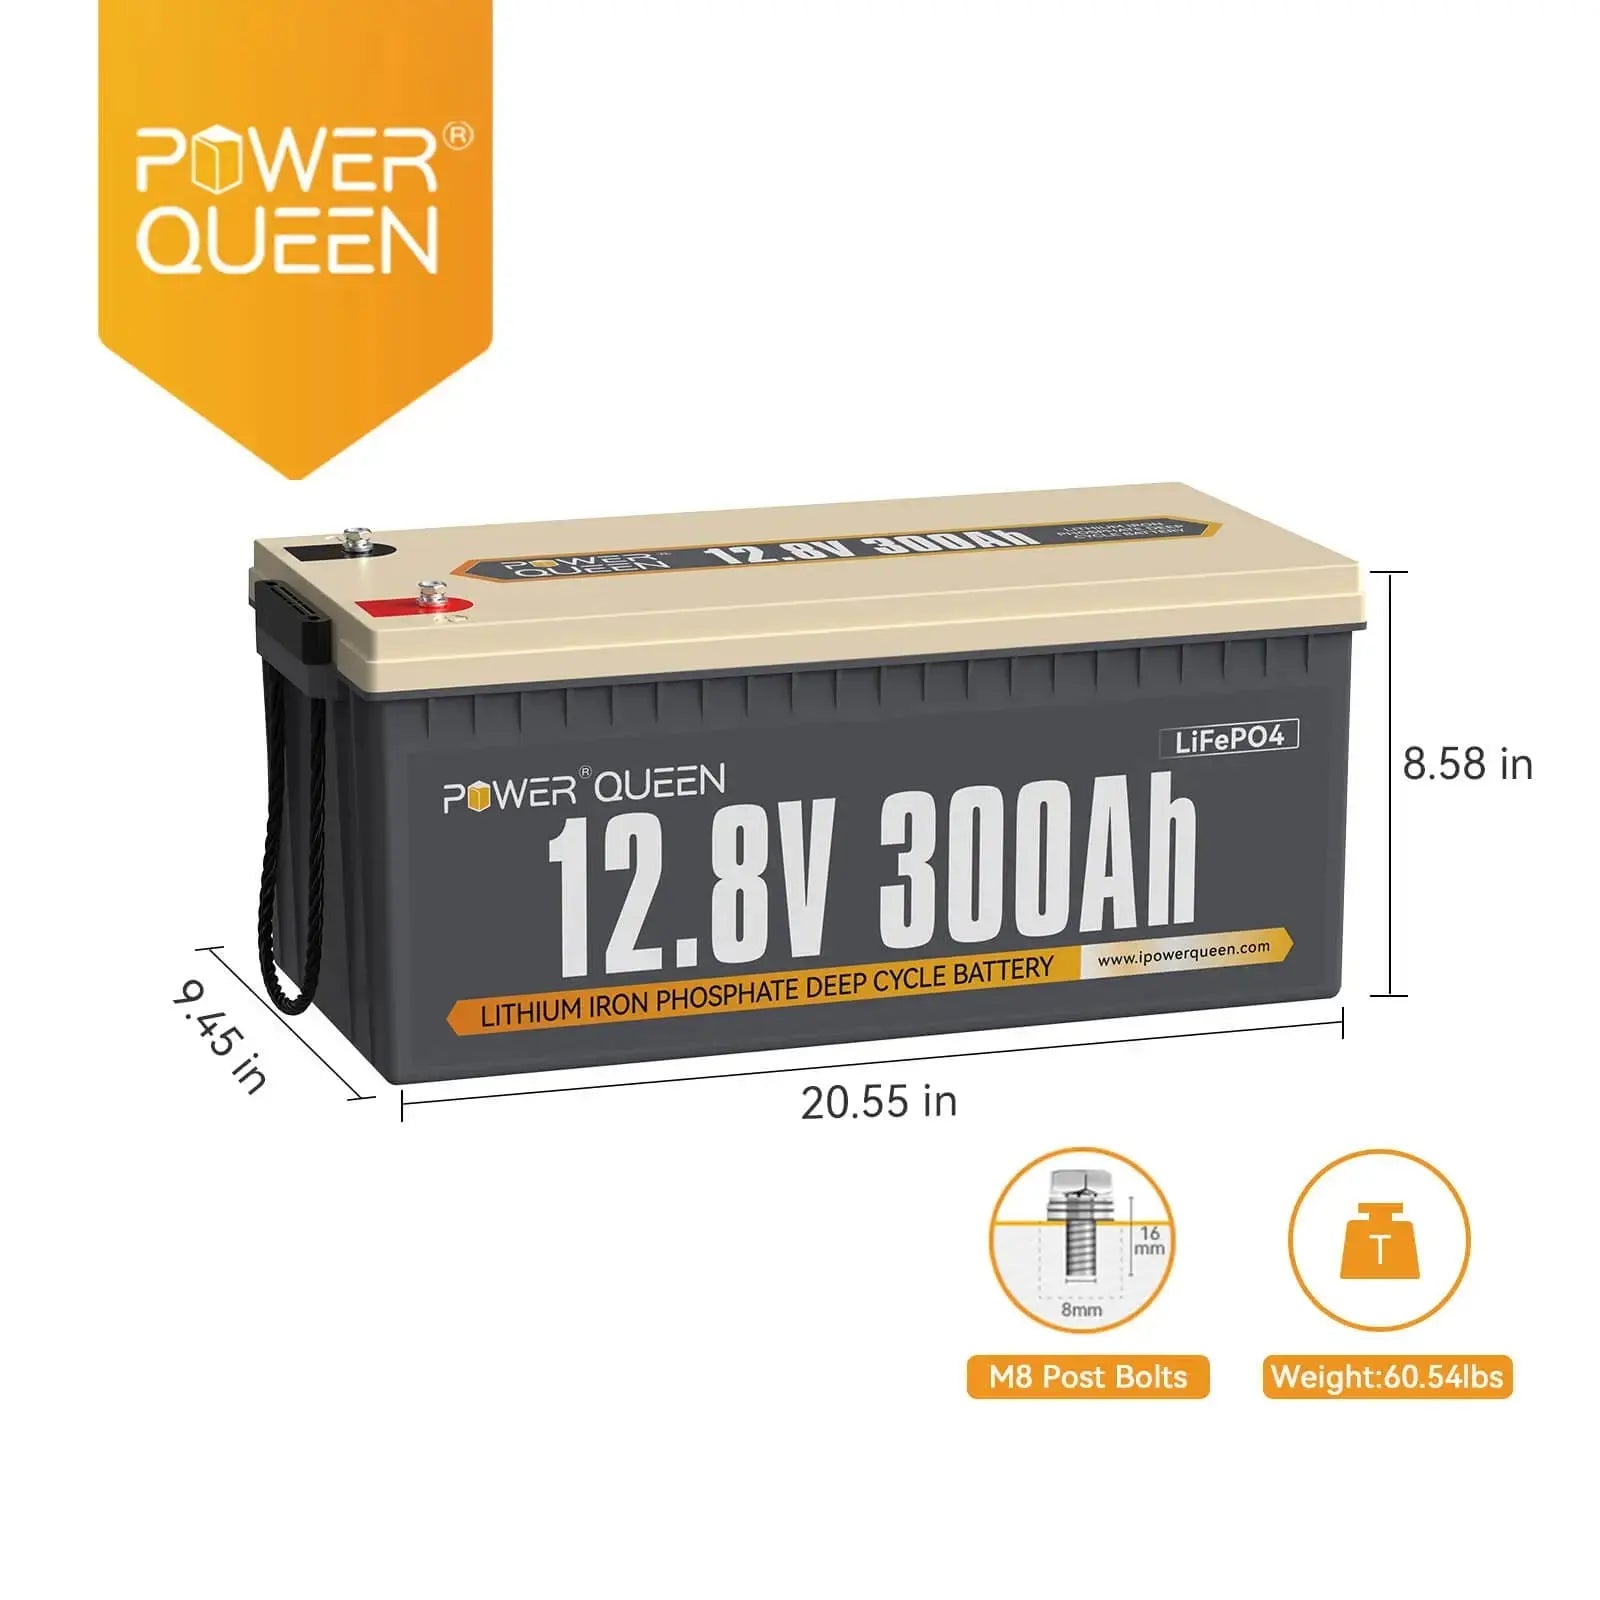 Power Queen 12V 300Ah 3.84kWh LiFePO4 Lithium Battery, Built-in